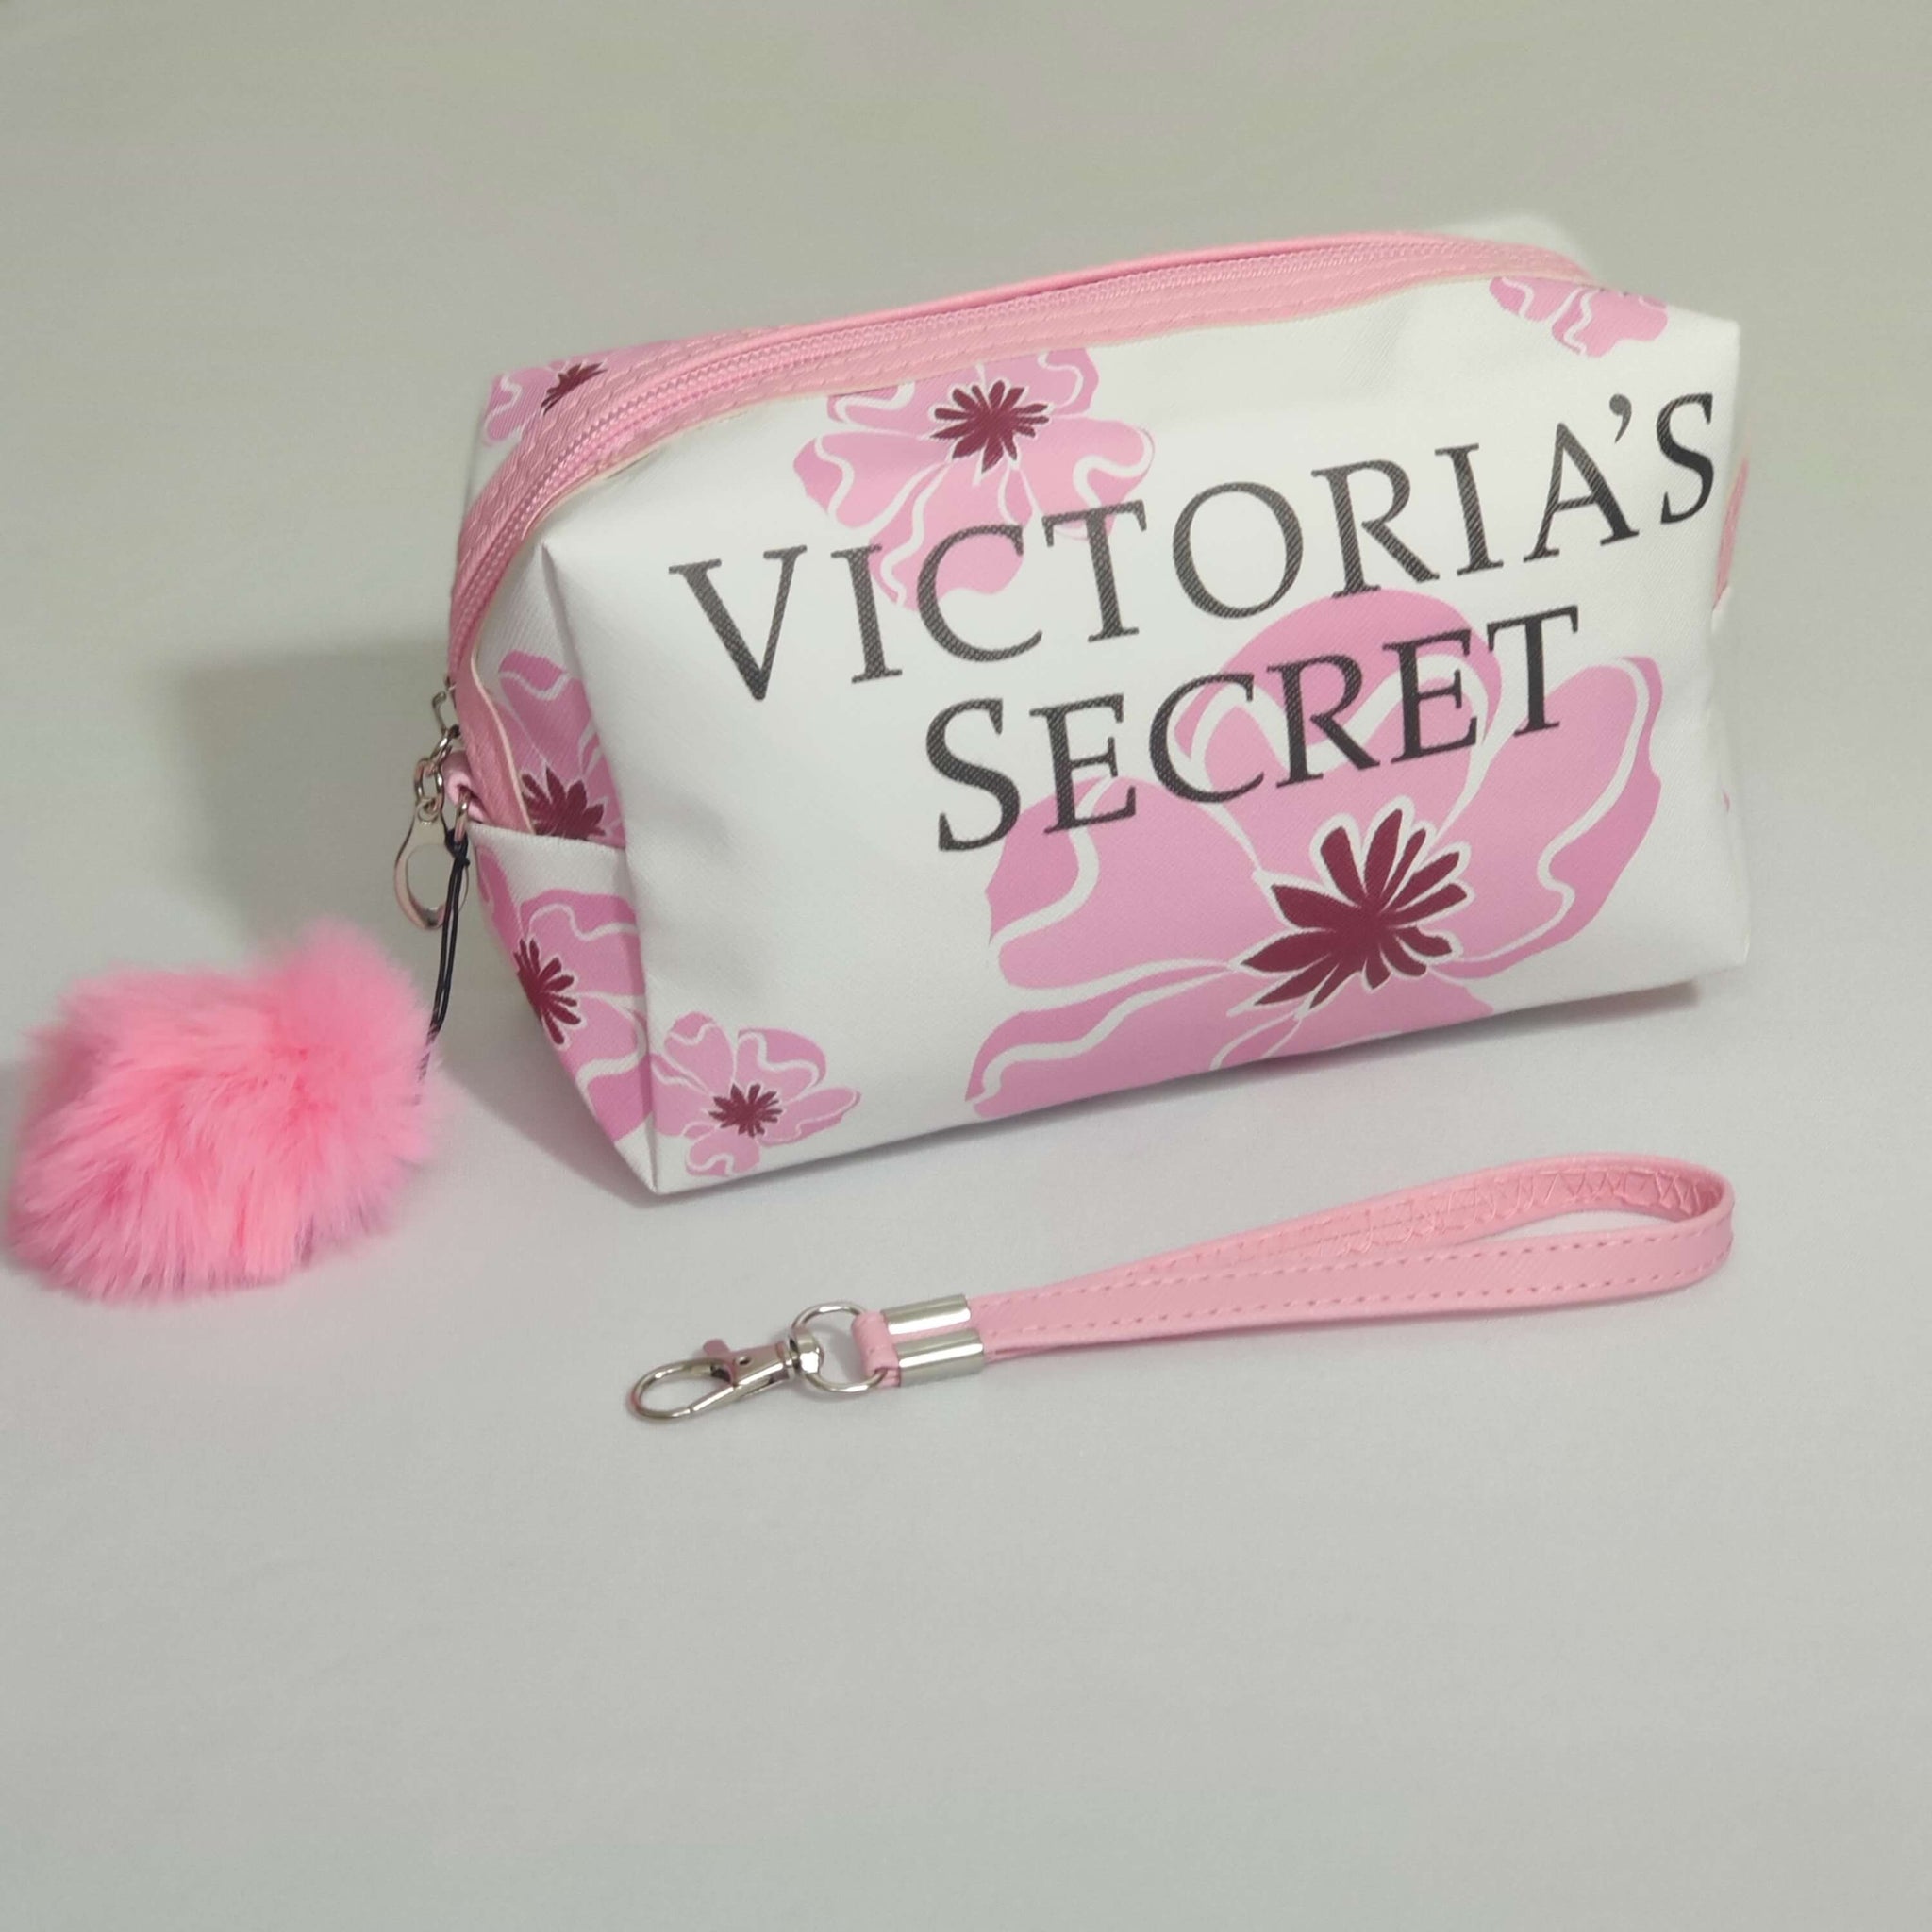 Buy Victoria's Secret Signature Cosmetic Bag Makeup Bag Large Online at Low  Prices in India 